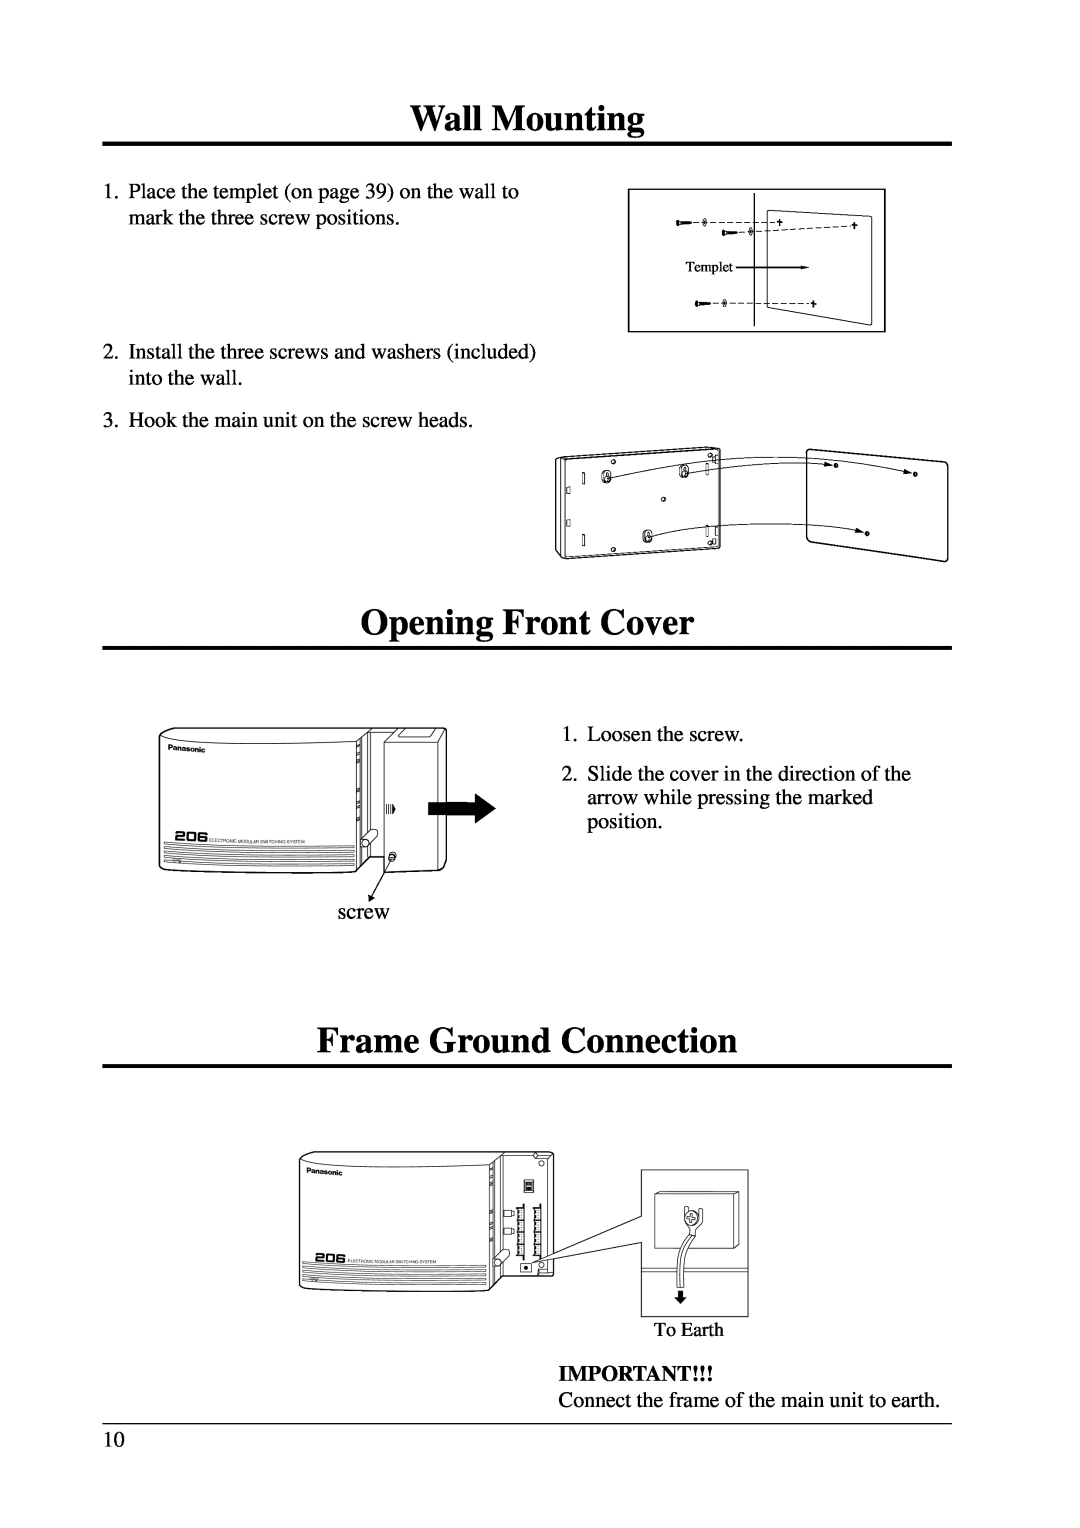 Panasonic KX-T206E manual Wall Mounting, Opening Front Cover, Frame Ground Connection, screw 